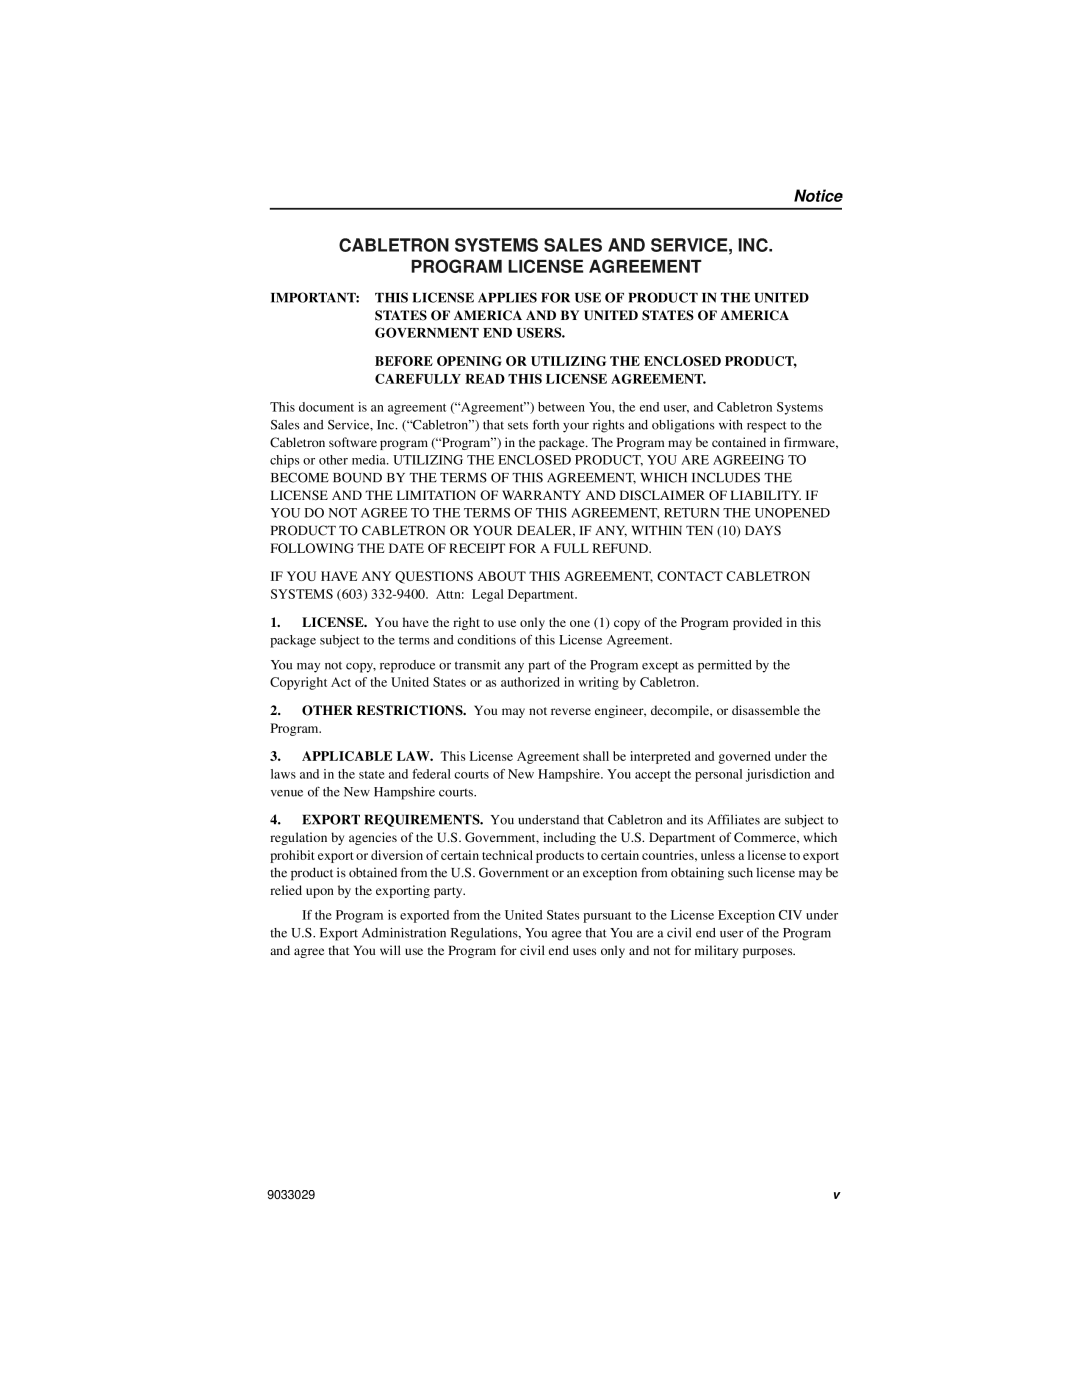 Cabletron Systems ELS100-8TXUF2 manual Cabletron Systems Sales And Service, Inc Program License Agreement 